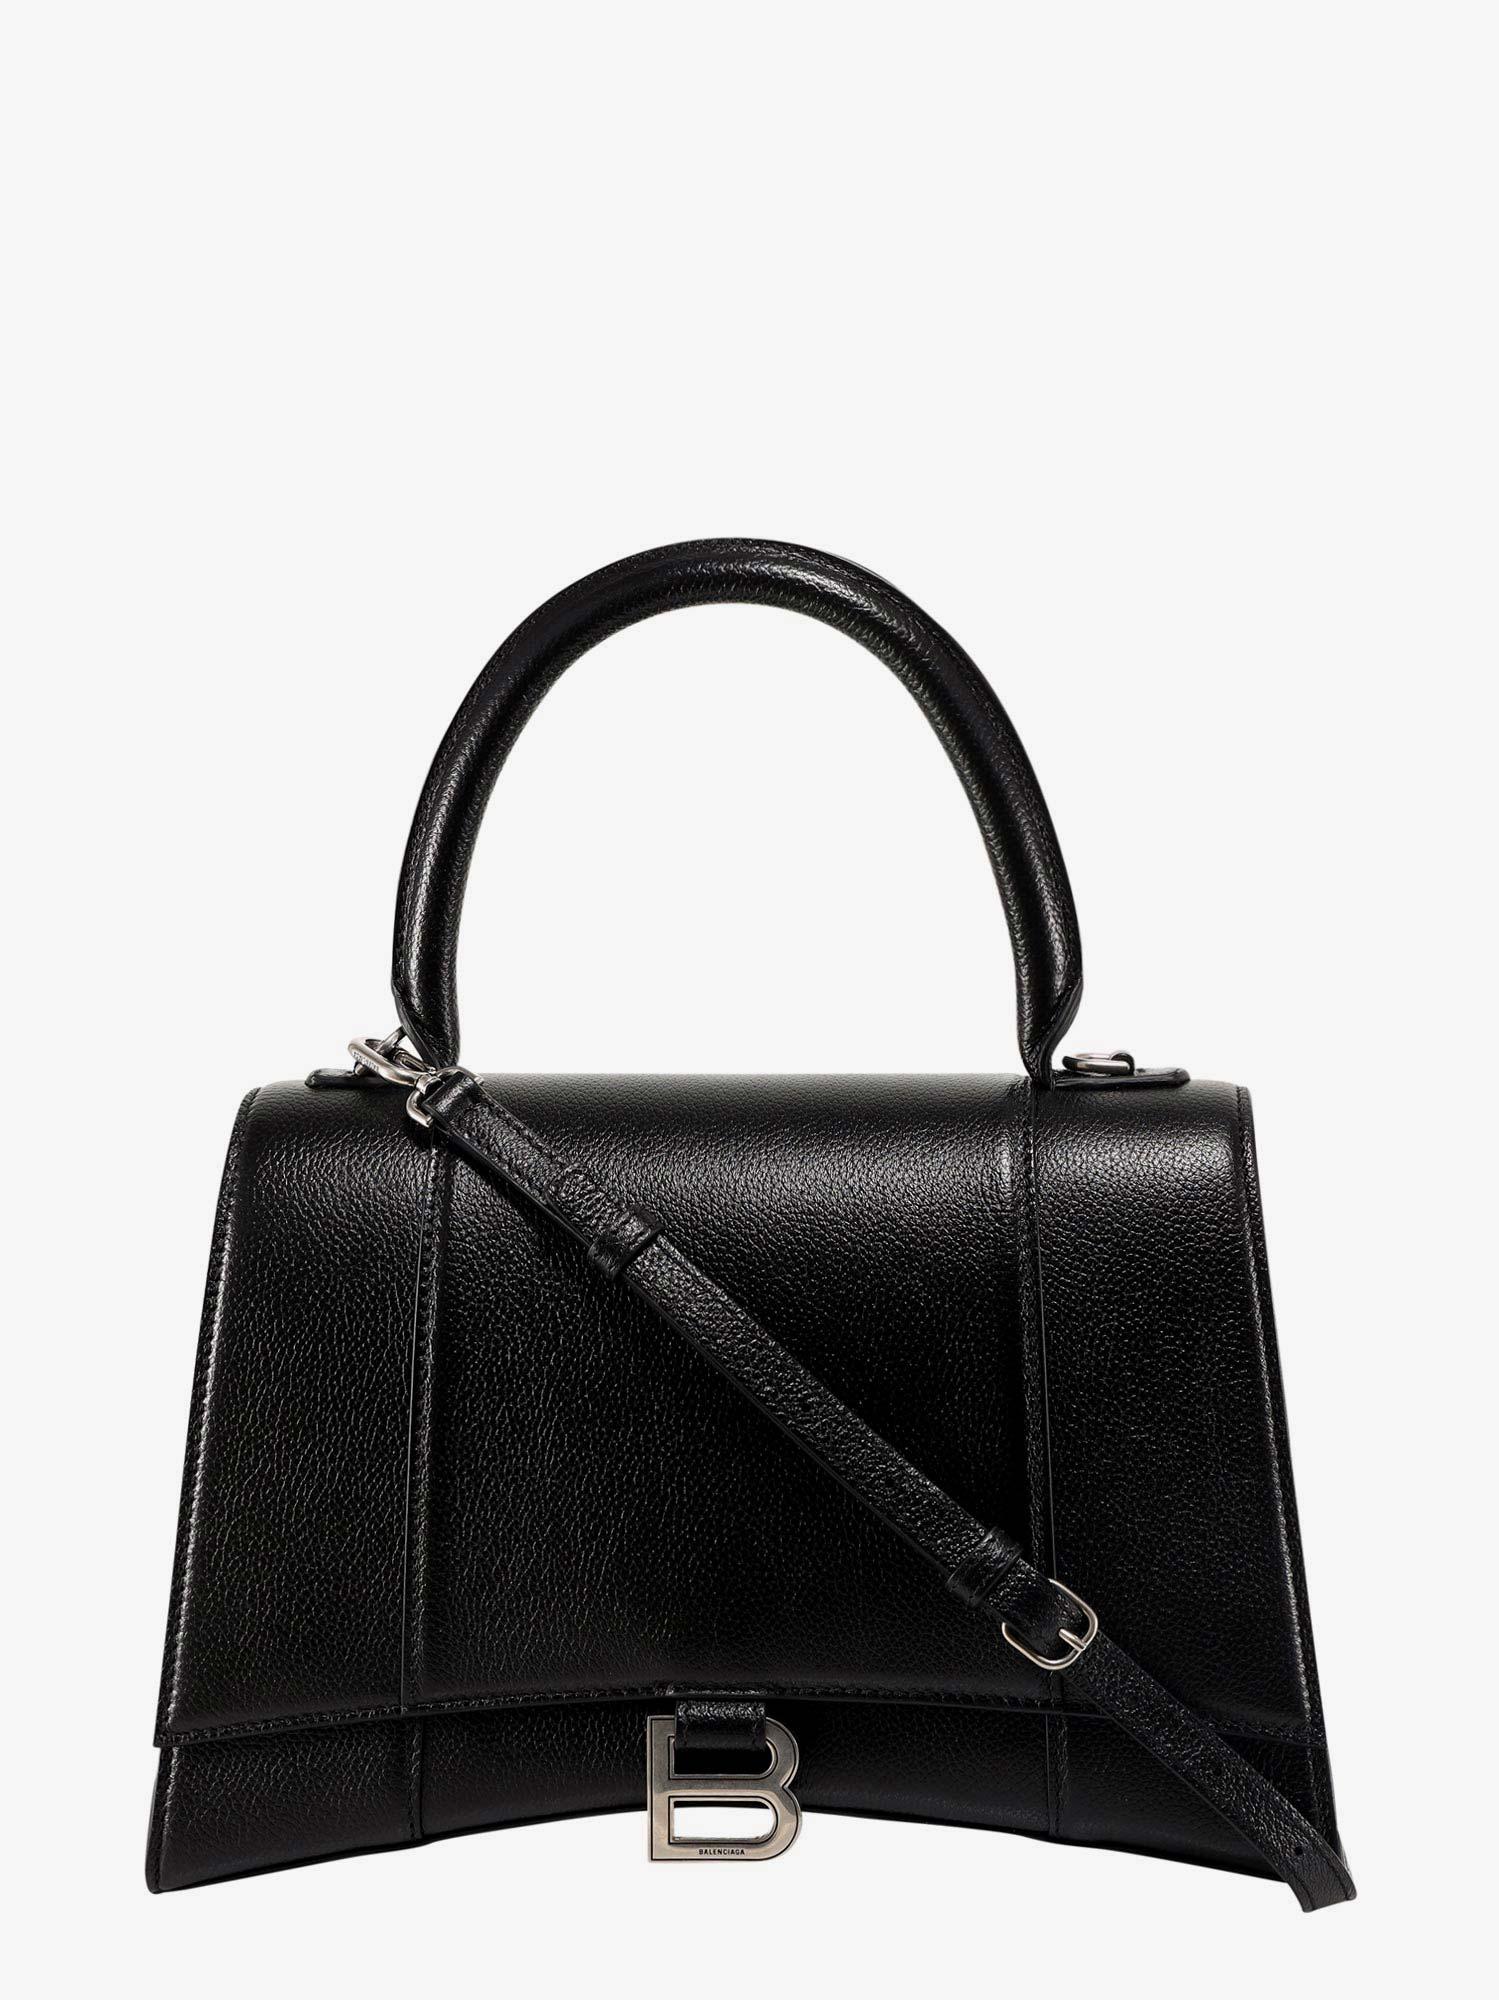 Balenciaga Leather Hourglass in Black - Lyst